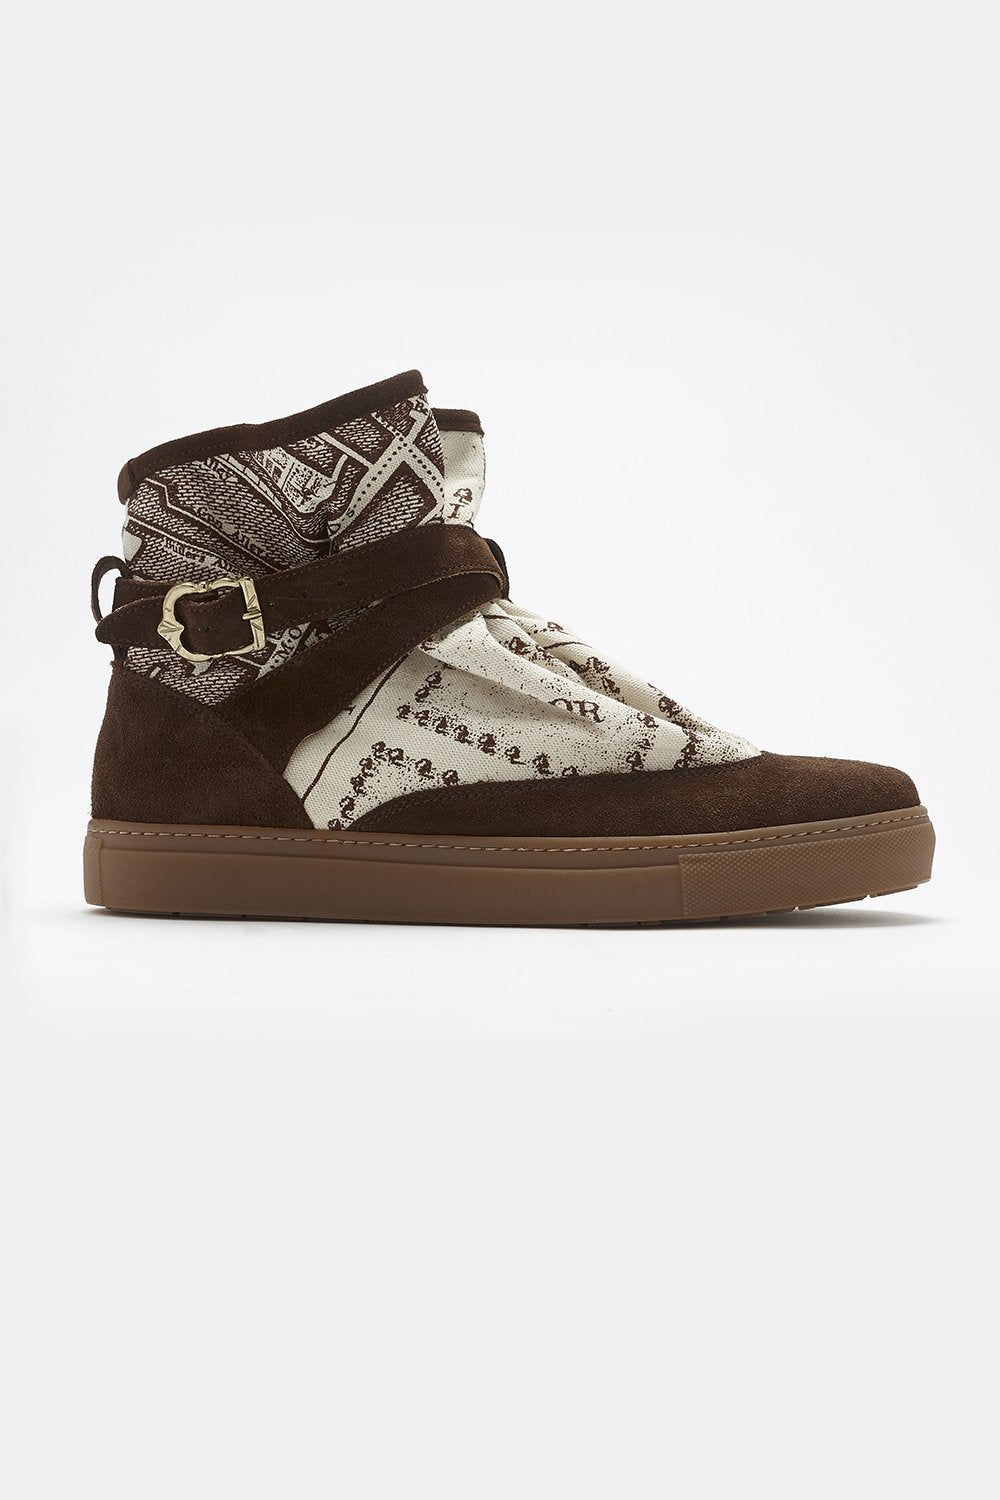 HIGHPAD SNEAKER - BROWN BOUNDARY-shoes-A Child Of The Jago